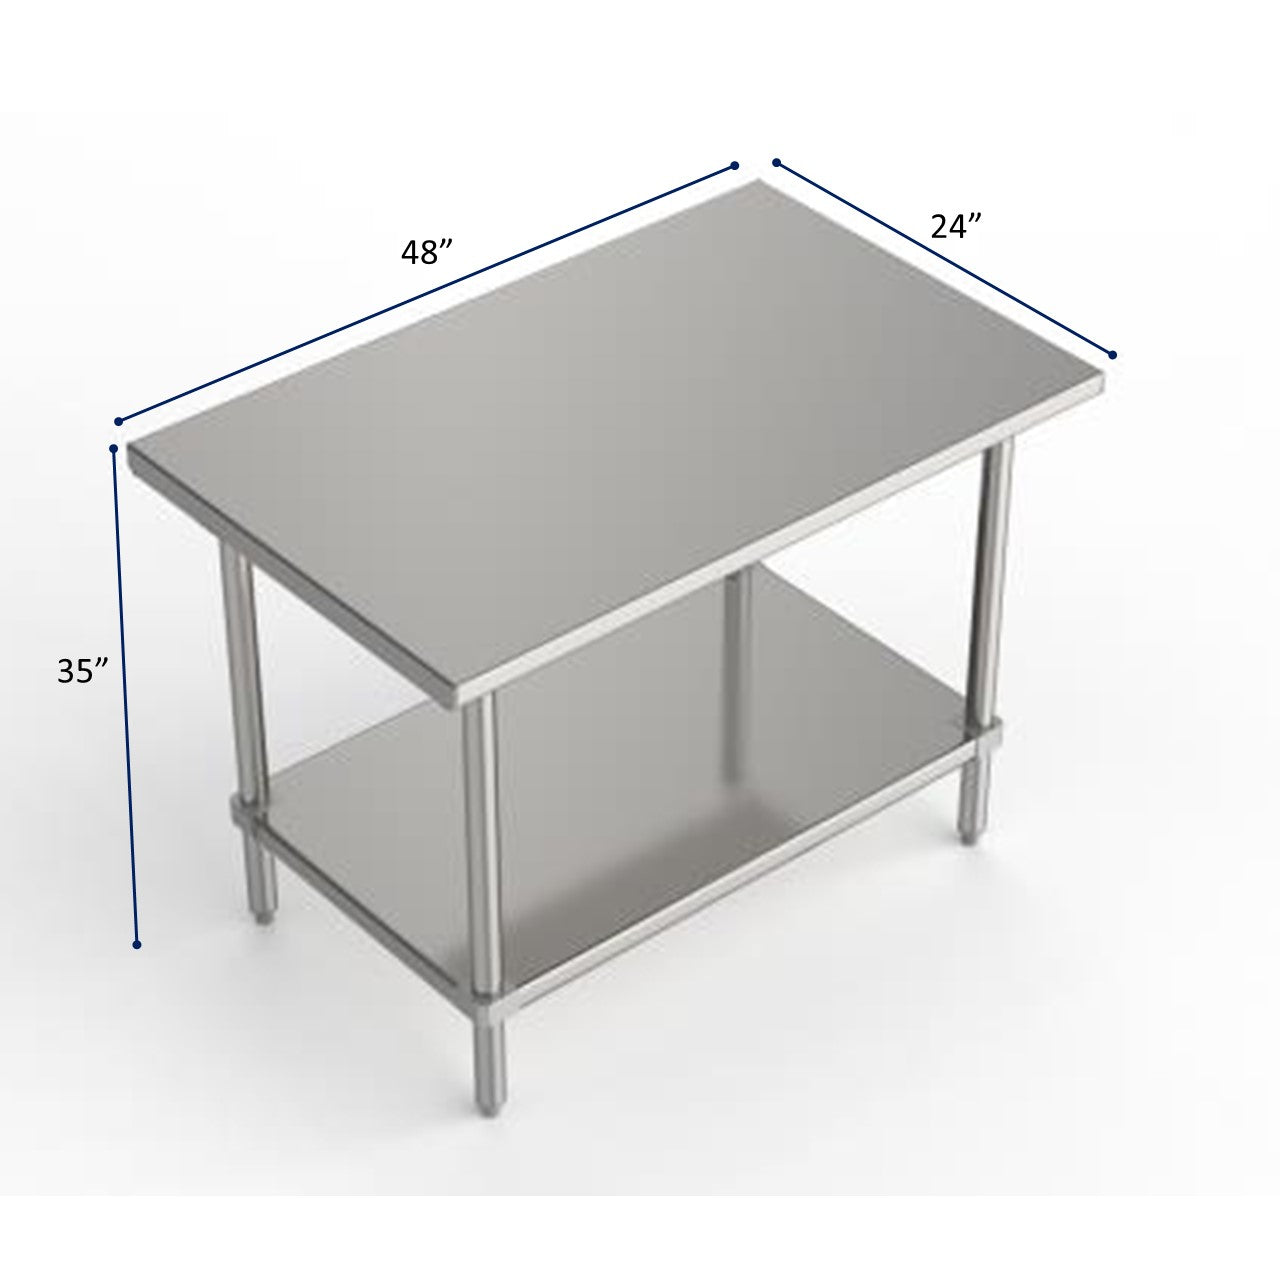 GSW Commercial Grade Flat Top Work Table with Stainless Steel Top, Galvanized Undershelf & Legs, Adjustable Bullet Feet, Perfect for Restaurant, Home, Office, Kitchen or Garage, NSF Approved (24"D x 48"L x 35"H)